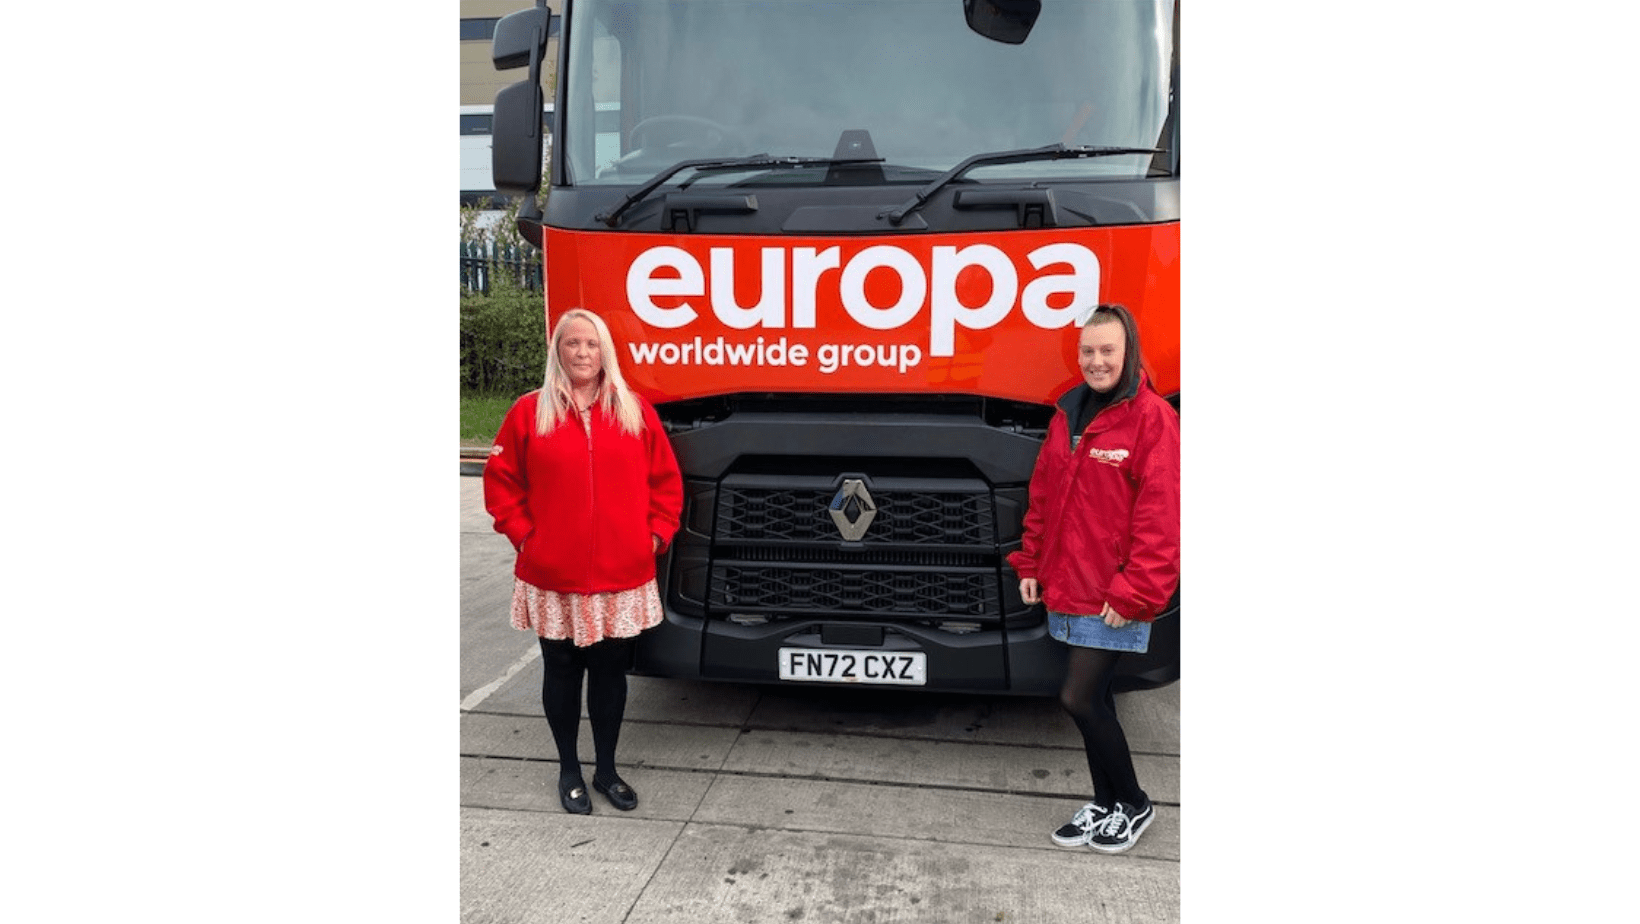 Sarah Elliott stands in front of red, branded Europa truck